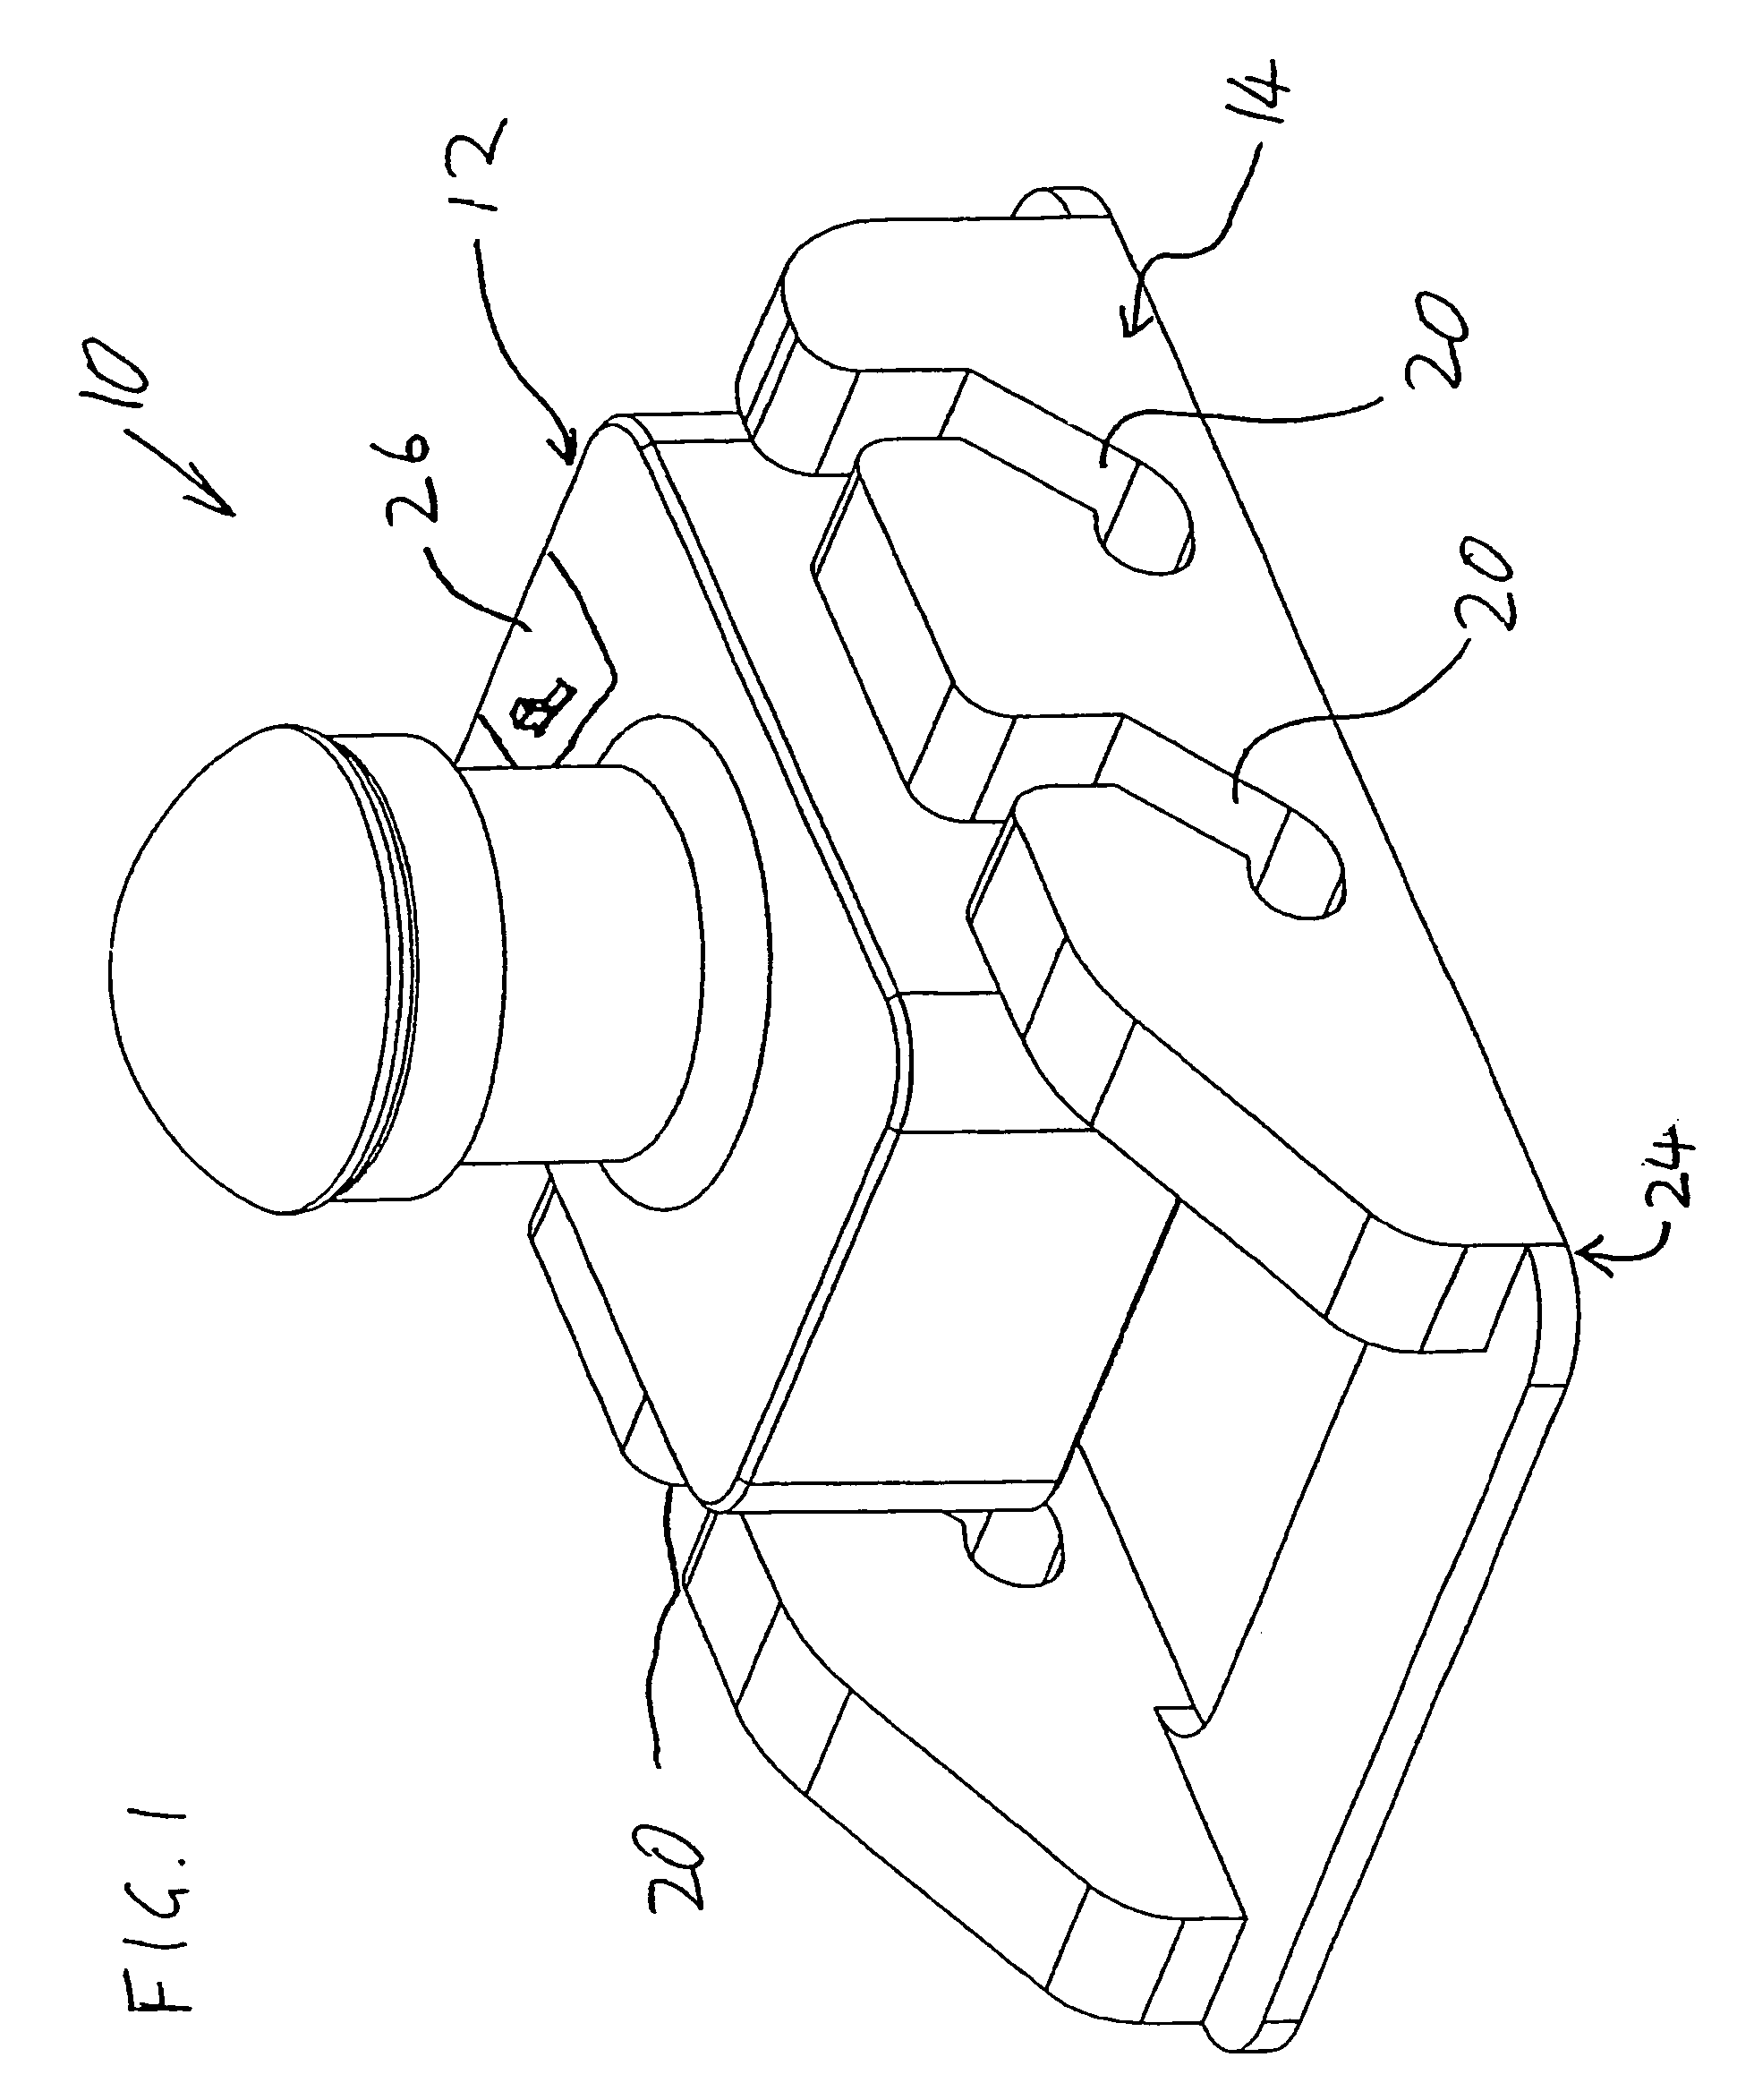 Devices and methods for transporting fluid across a biological barrier